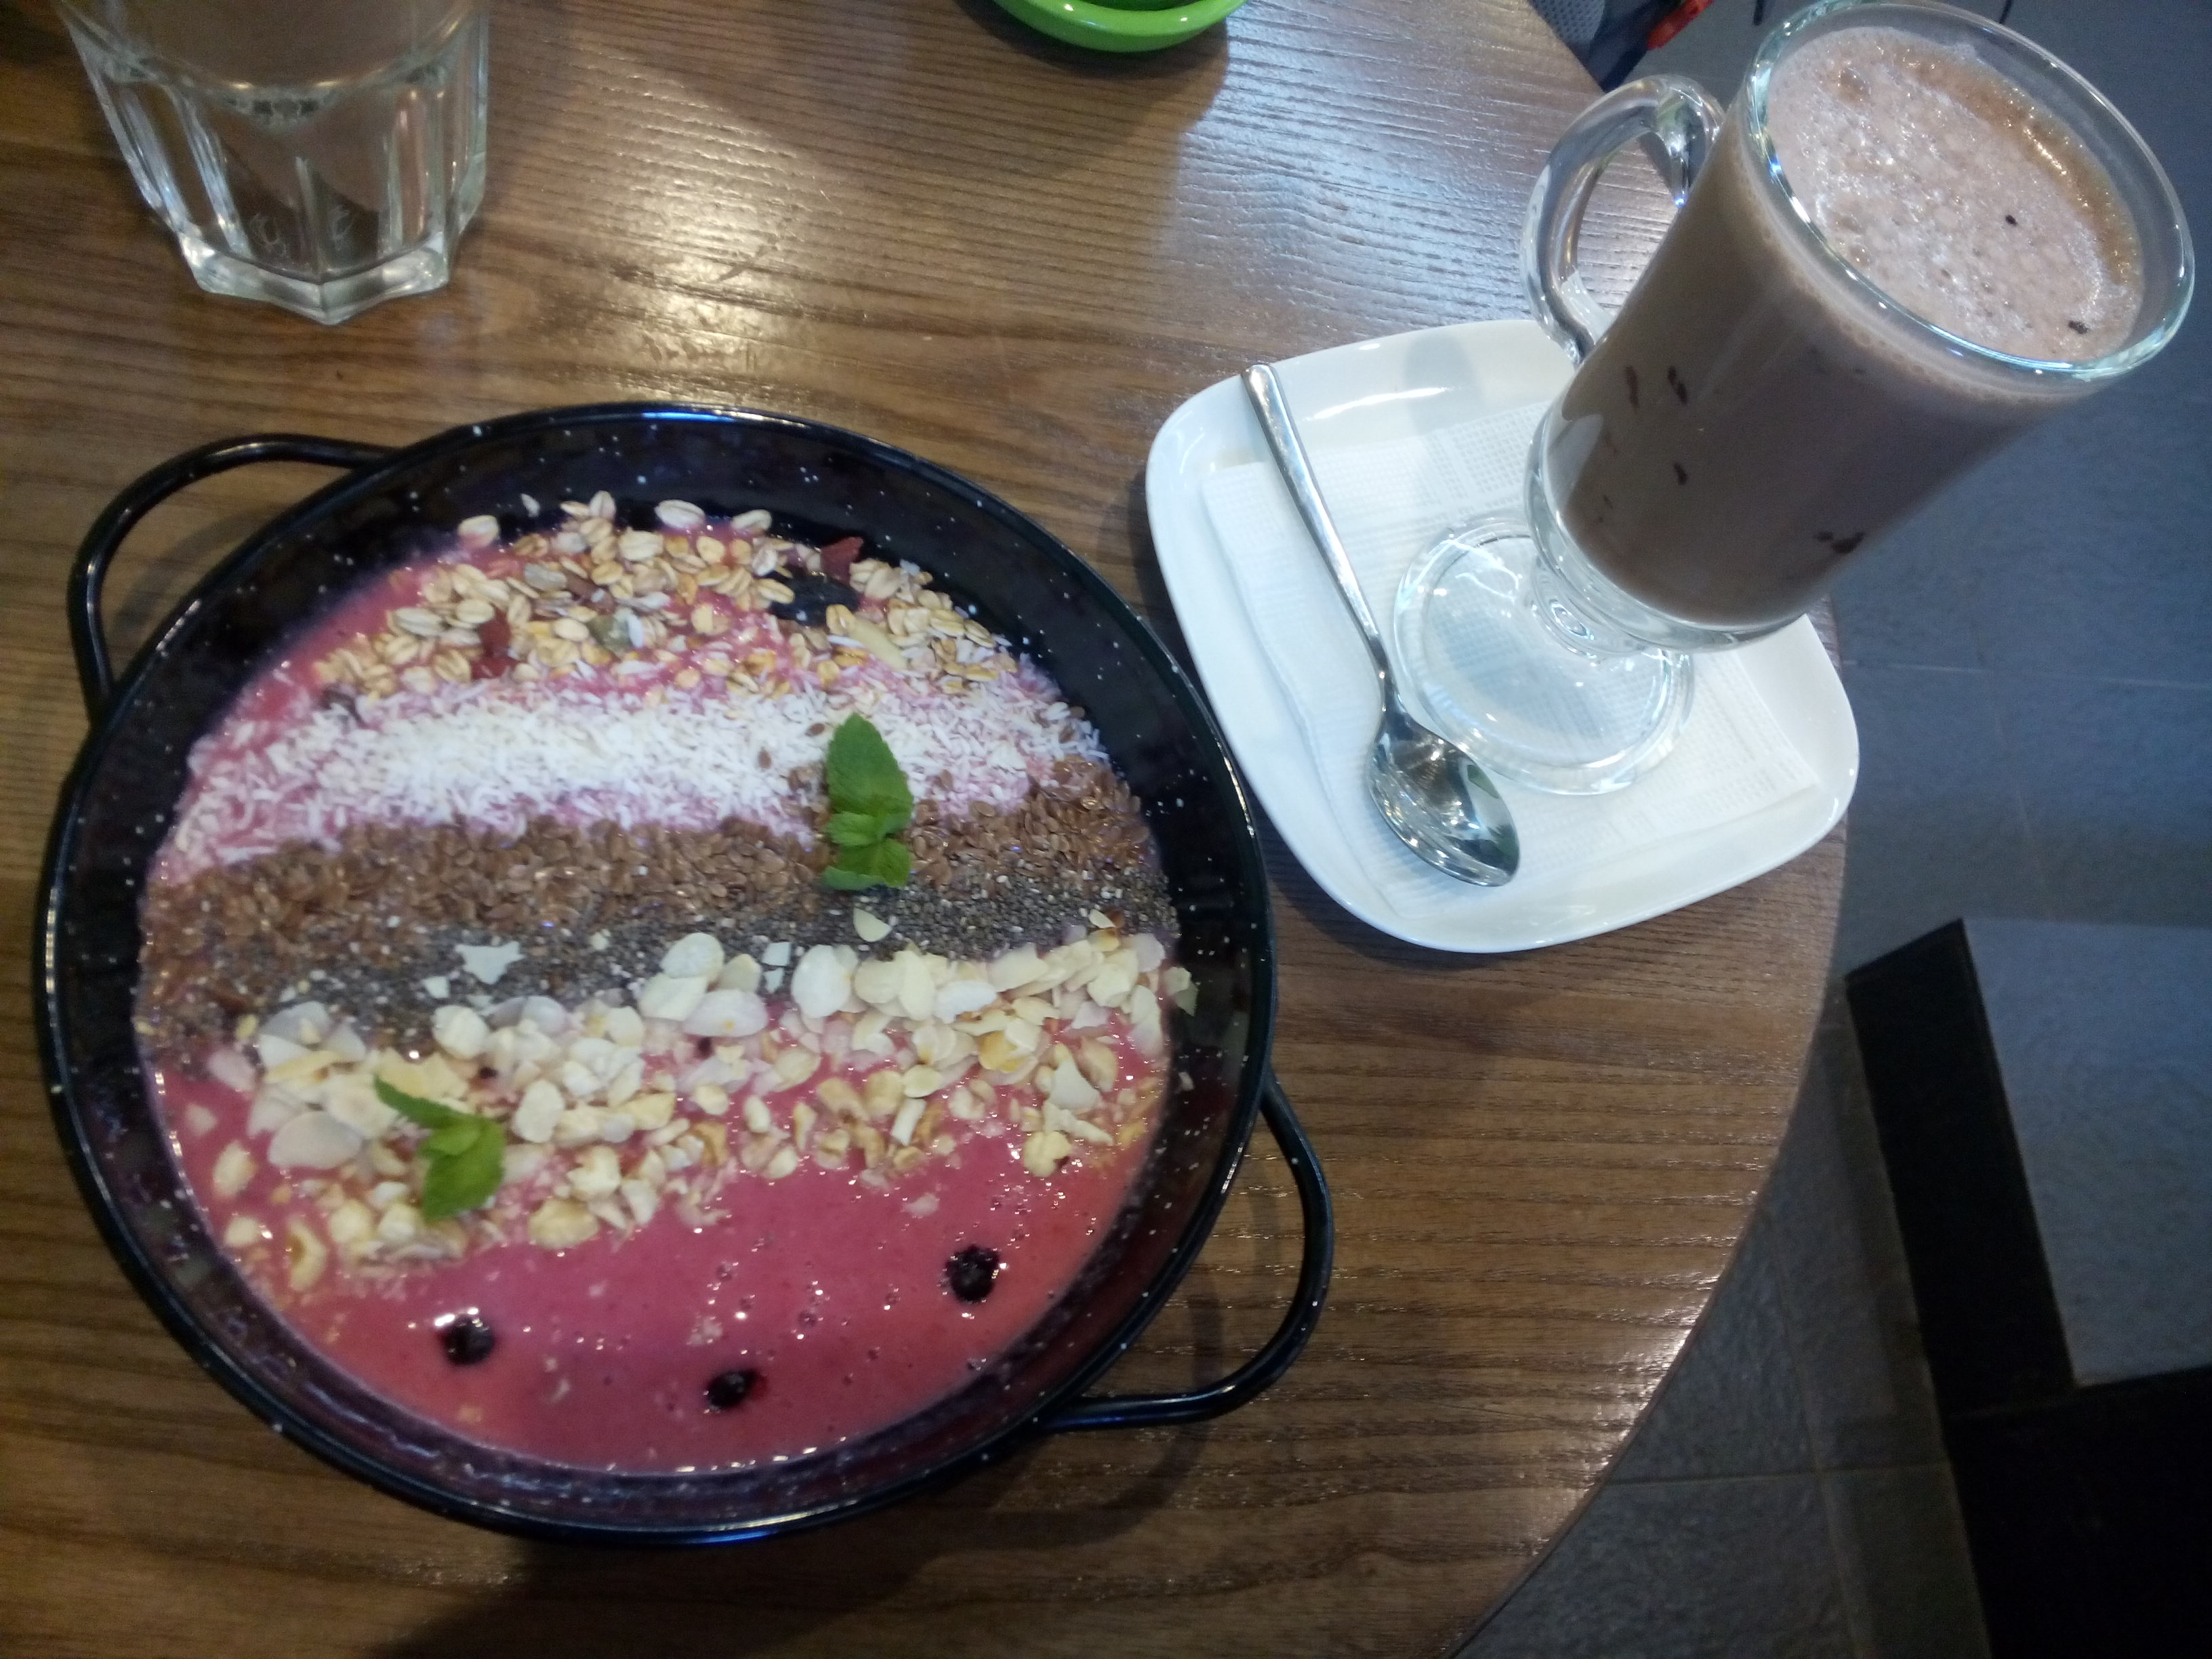 A wooden table with a black bowl containing smoothie, nuts and seeds, beside a hot chocolate in a tall glass